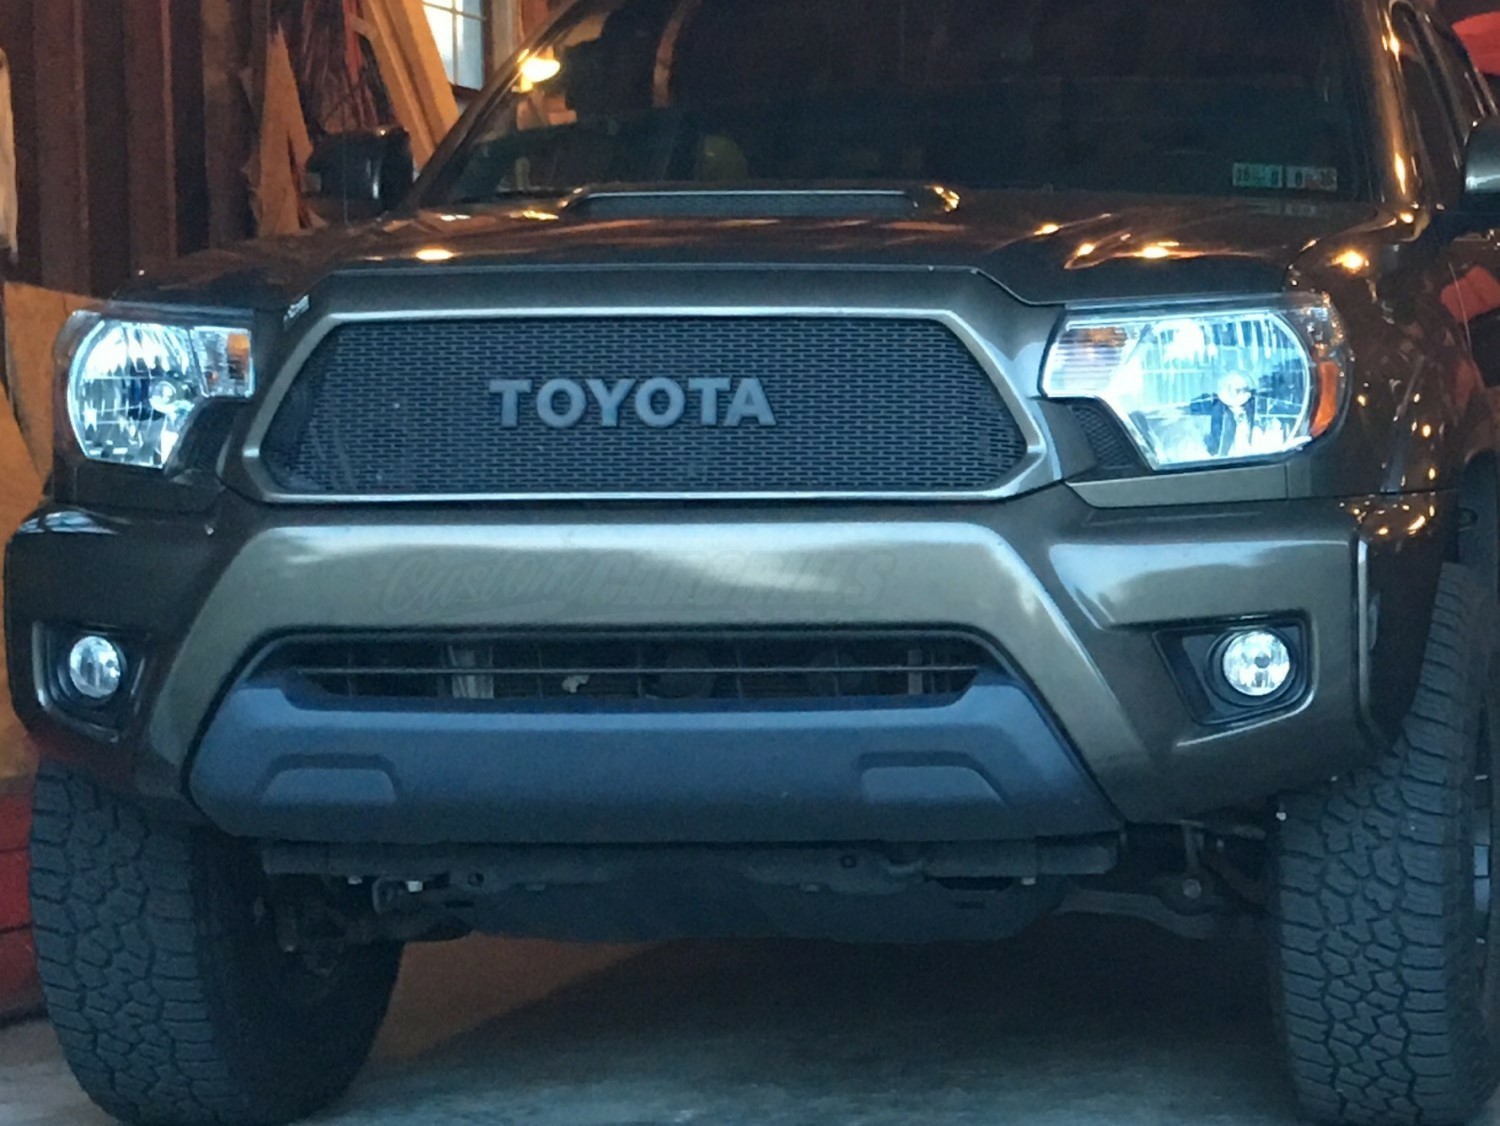 2012 - 2015 Toyota Tacoma Grill Mesh Builder #3